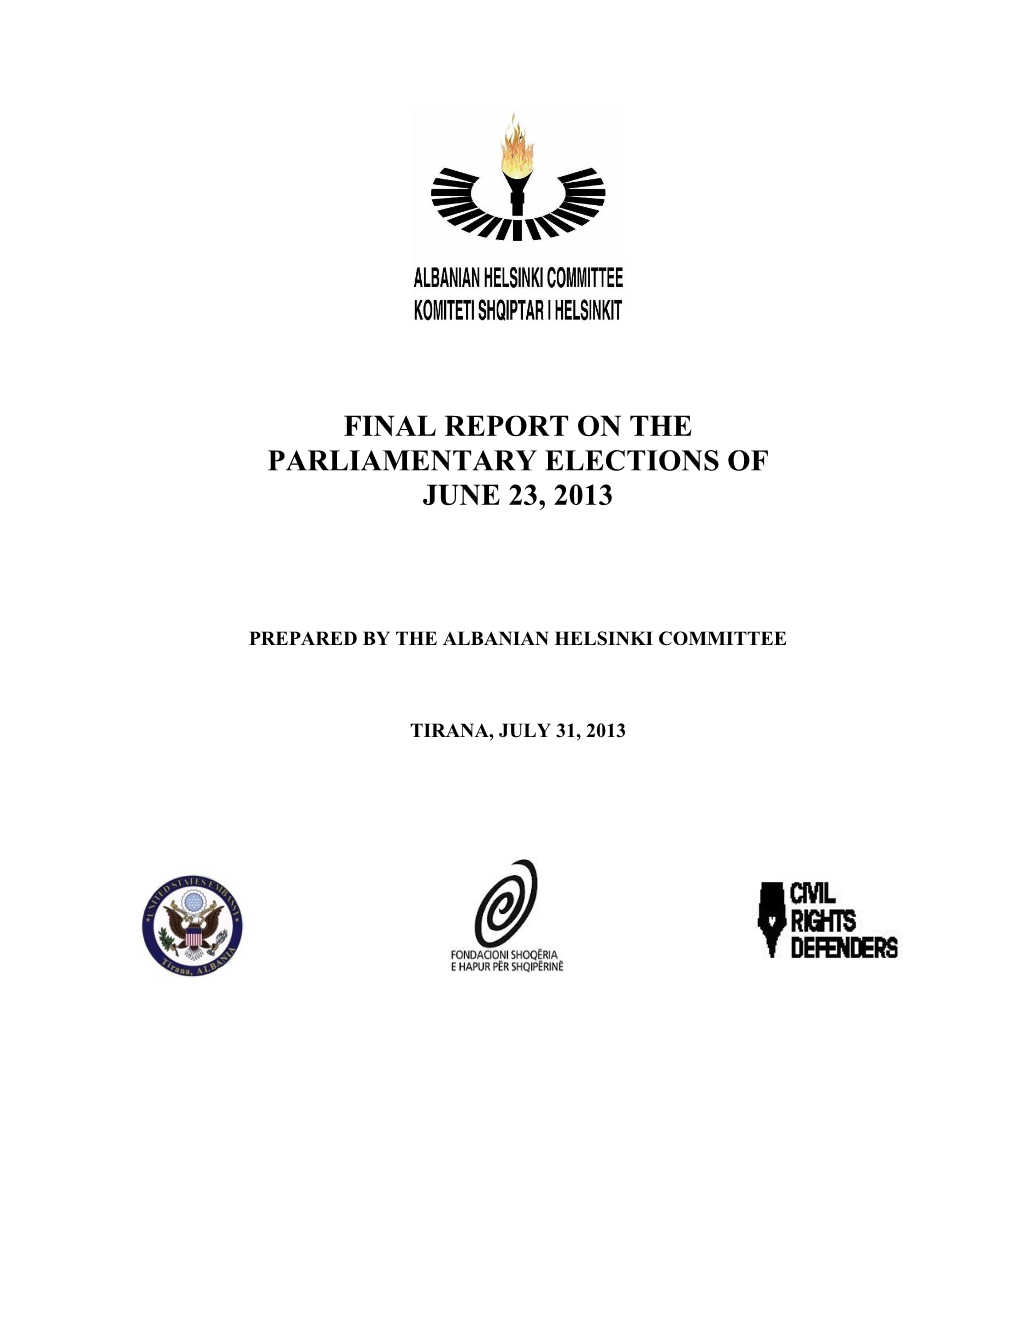 Final Report on the Parliamentary Elections of June 23, 2013